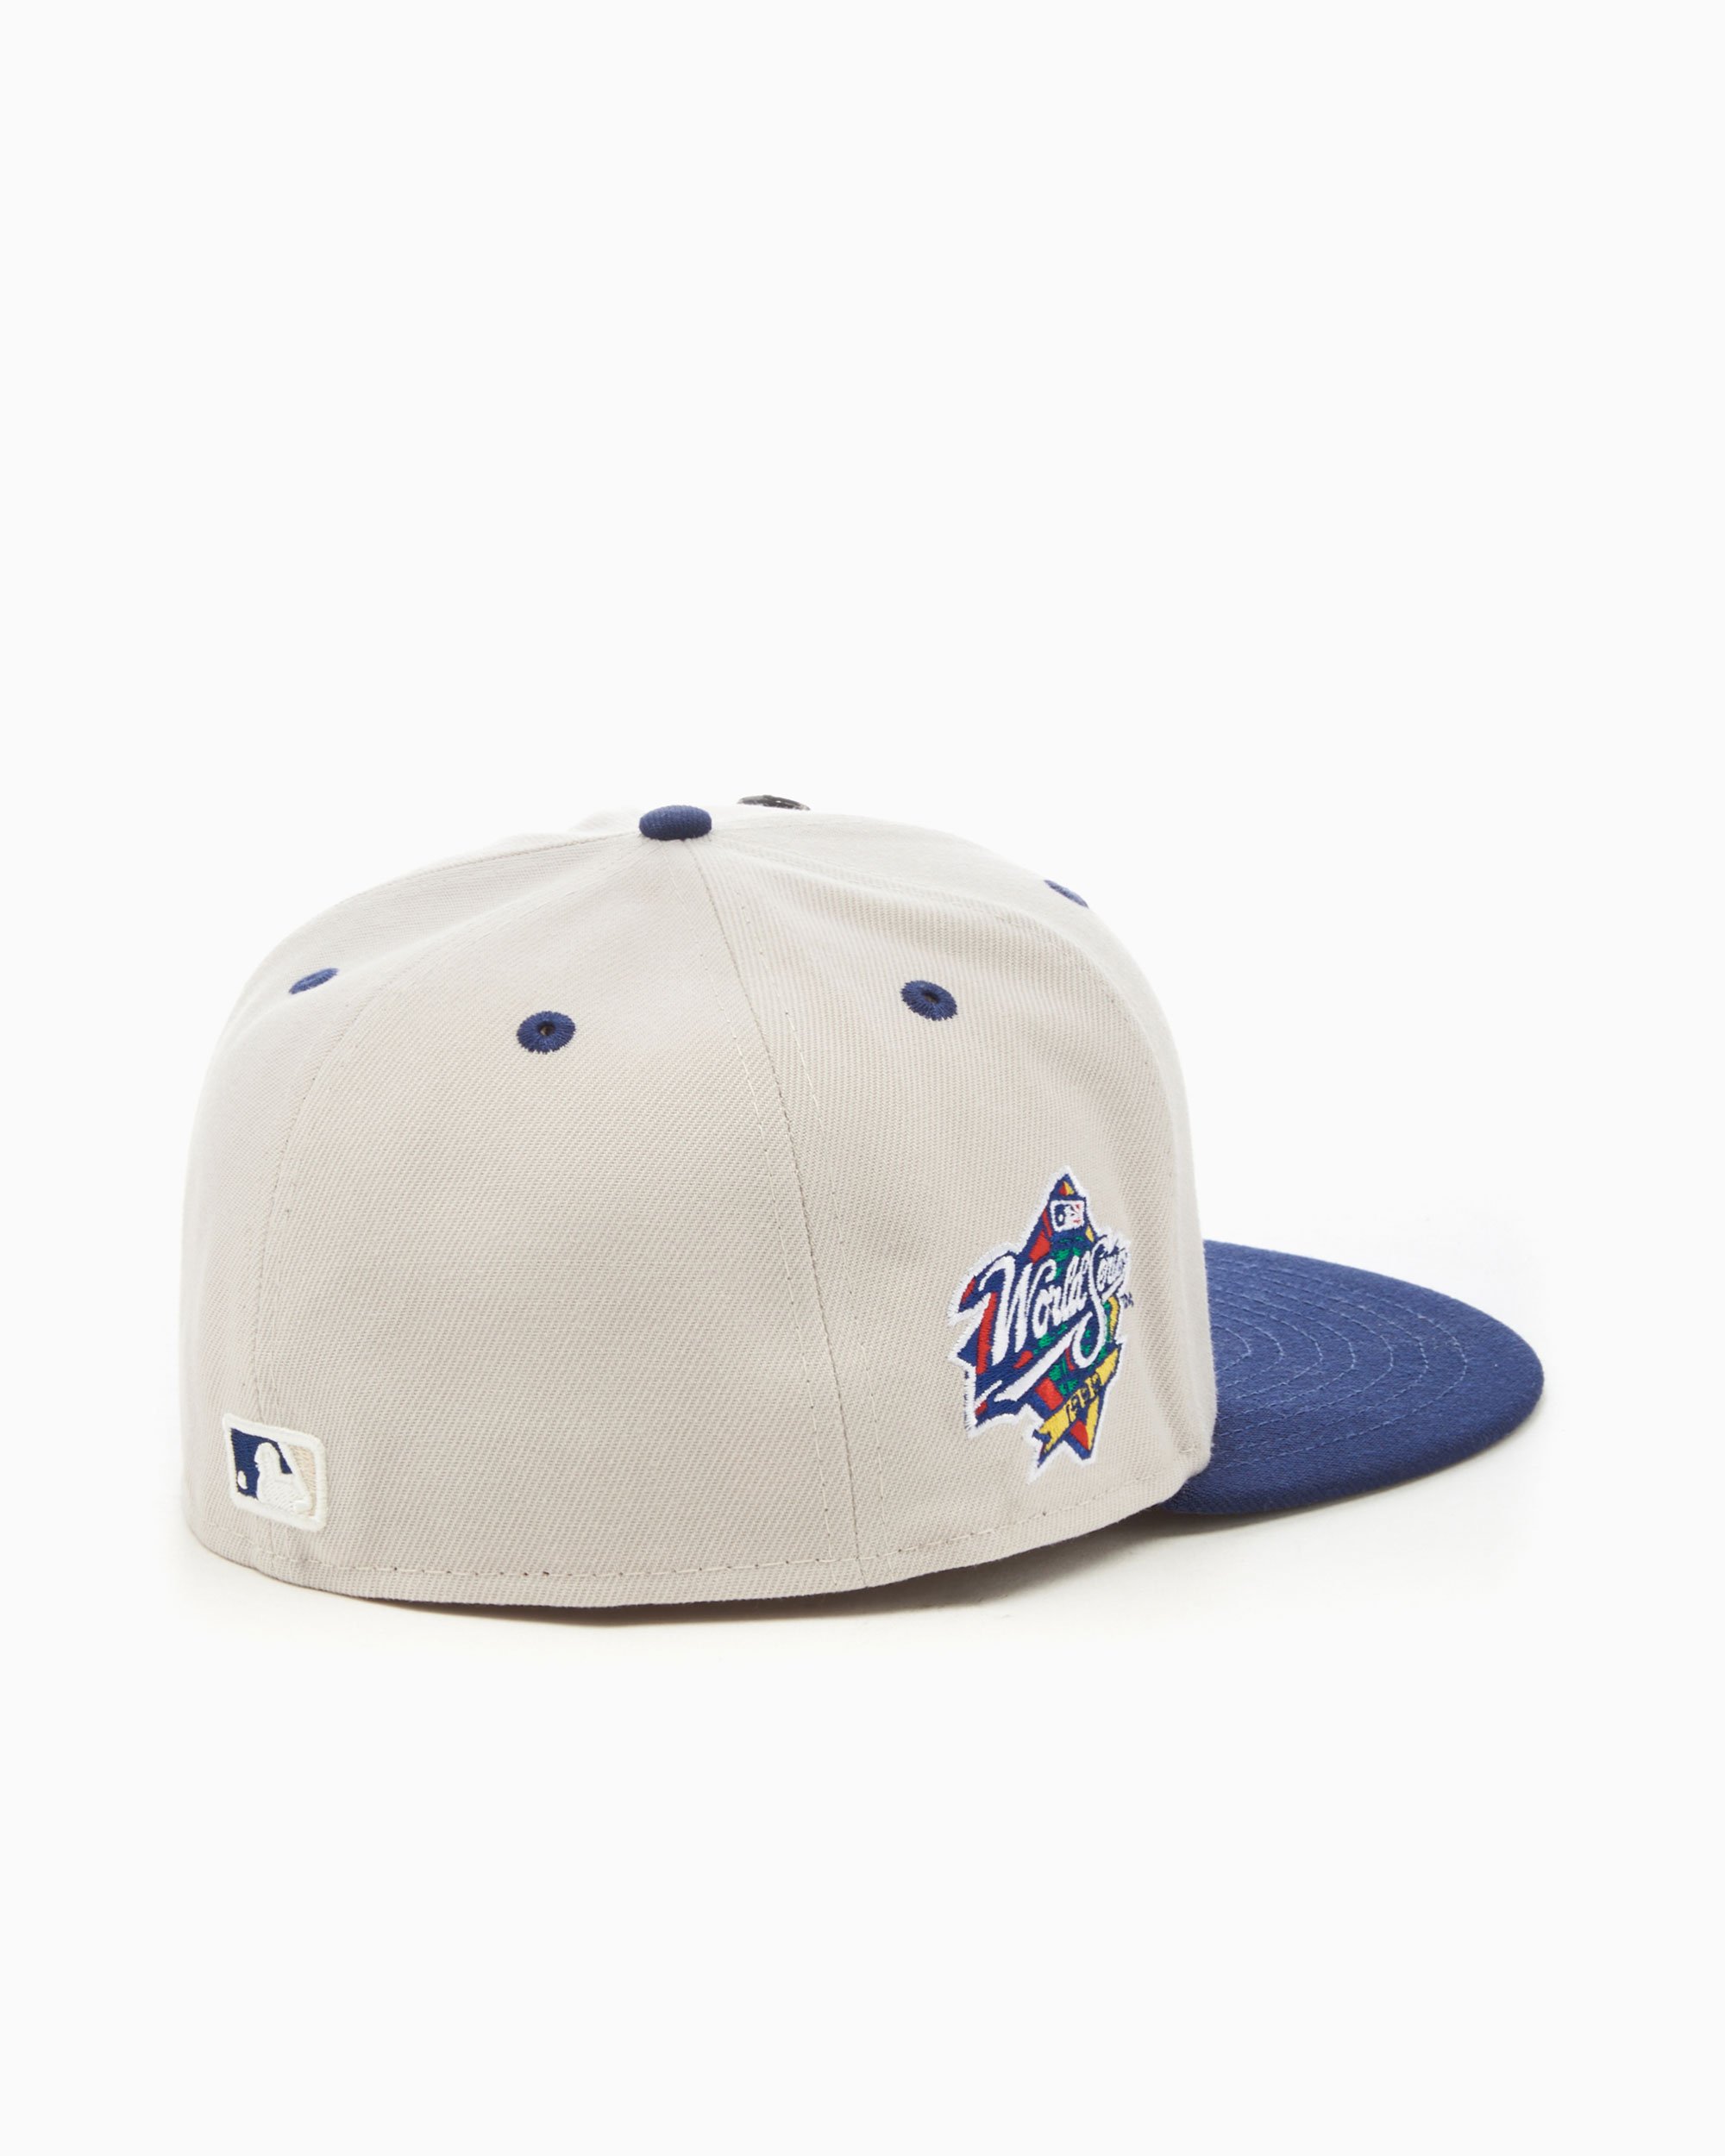 New Era at Buy York MLB Yankees 60357993| World Gray Fitted Unisex 59FIFTY Cap FOOTDISTRICT New Online Series